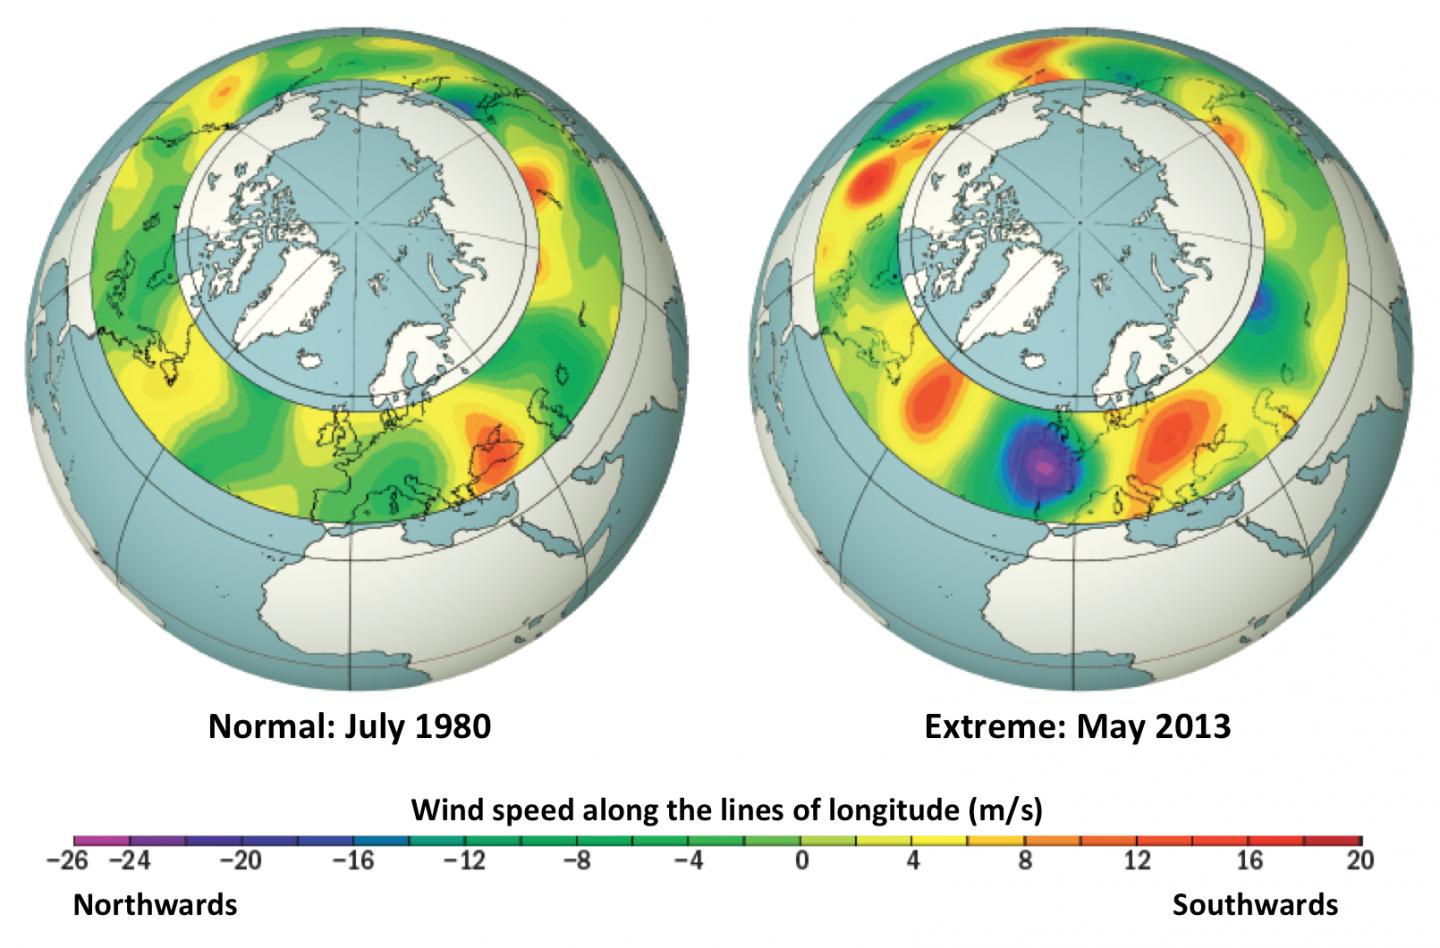 global warming effects on weather patterns